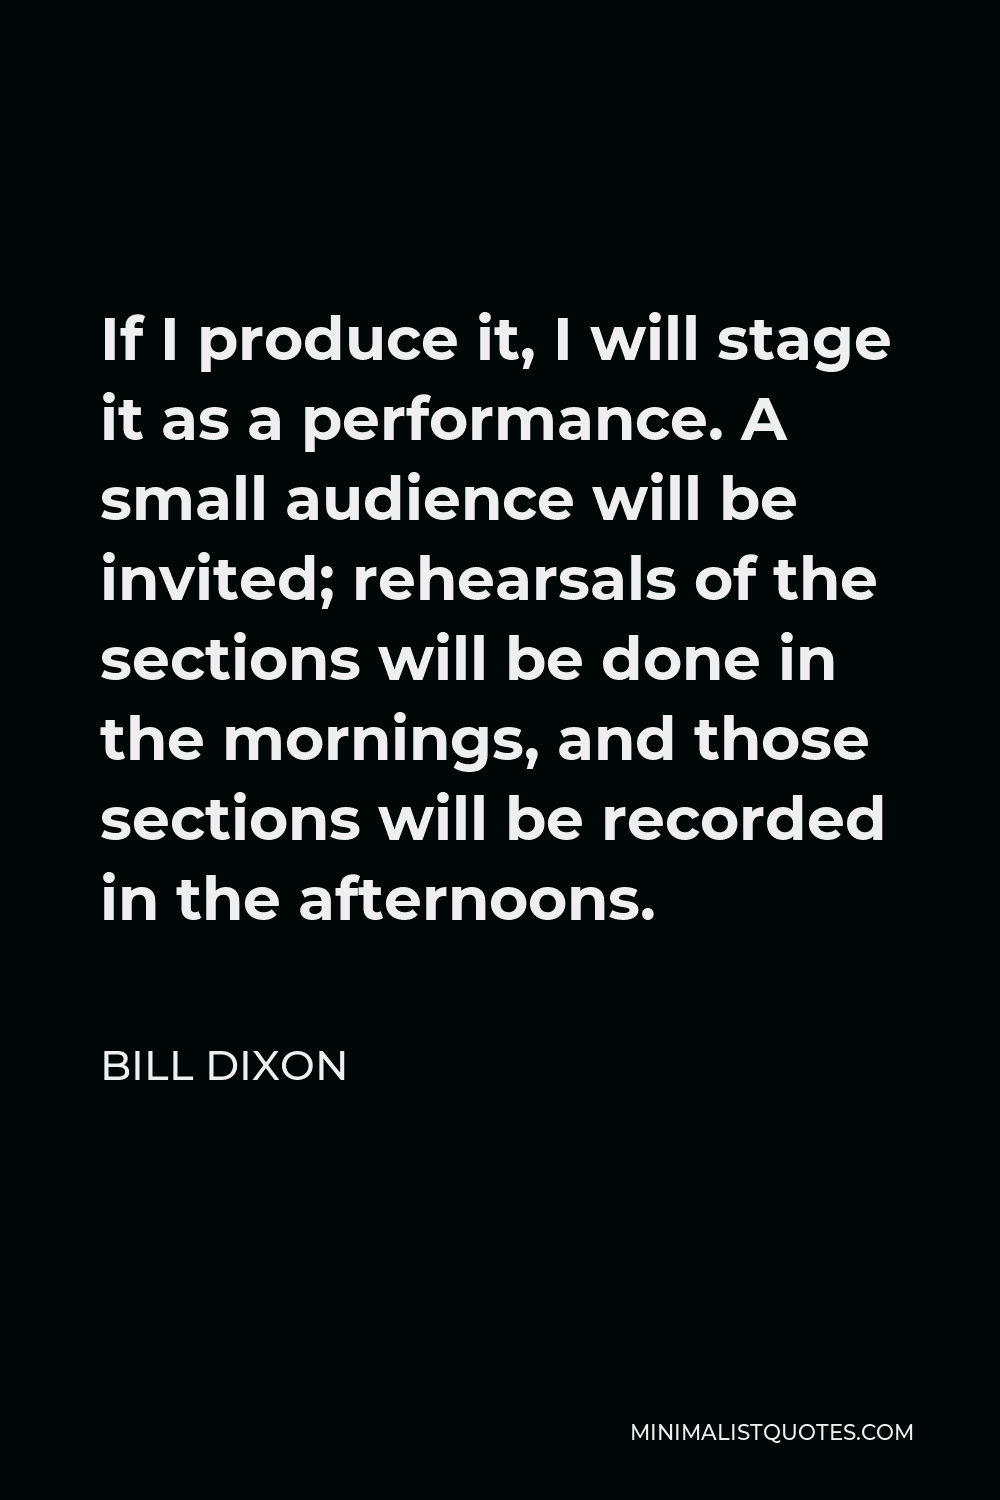 Bill Dixon Quote - If I produce it, I will stage it as a performance. A small audience will be invited; rehearsals of the sections will be done in the mornings, and those sections will be recorded in the afternoons.